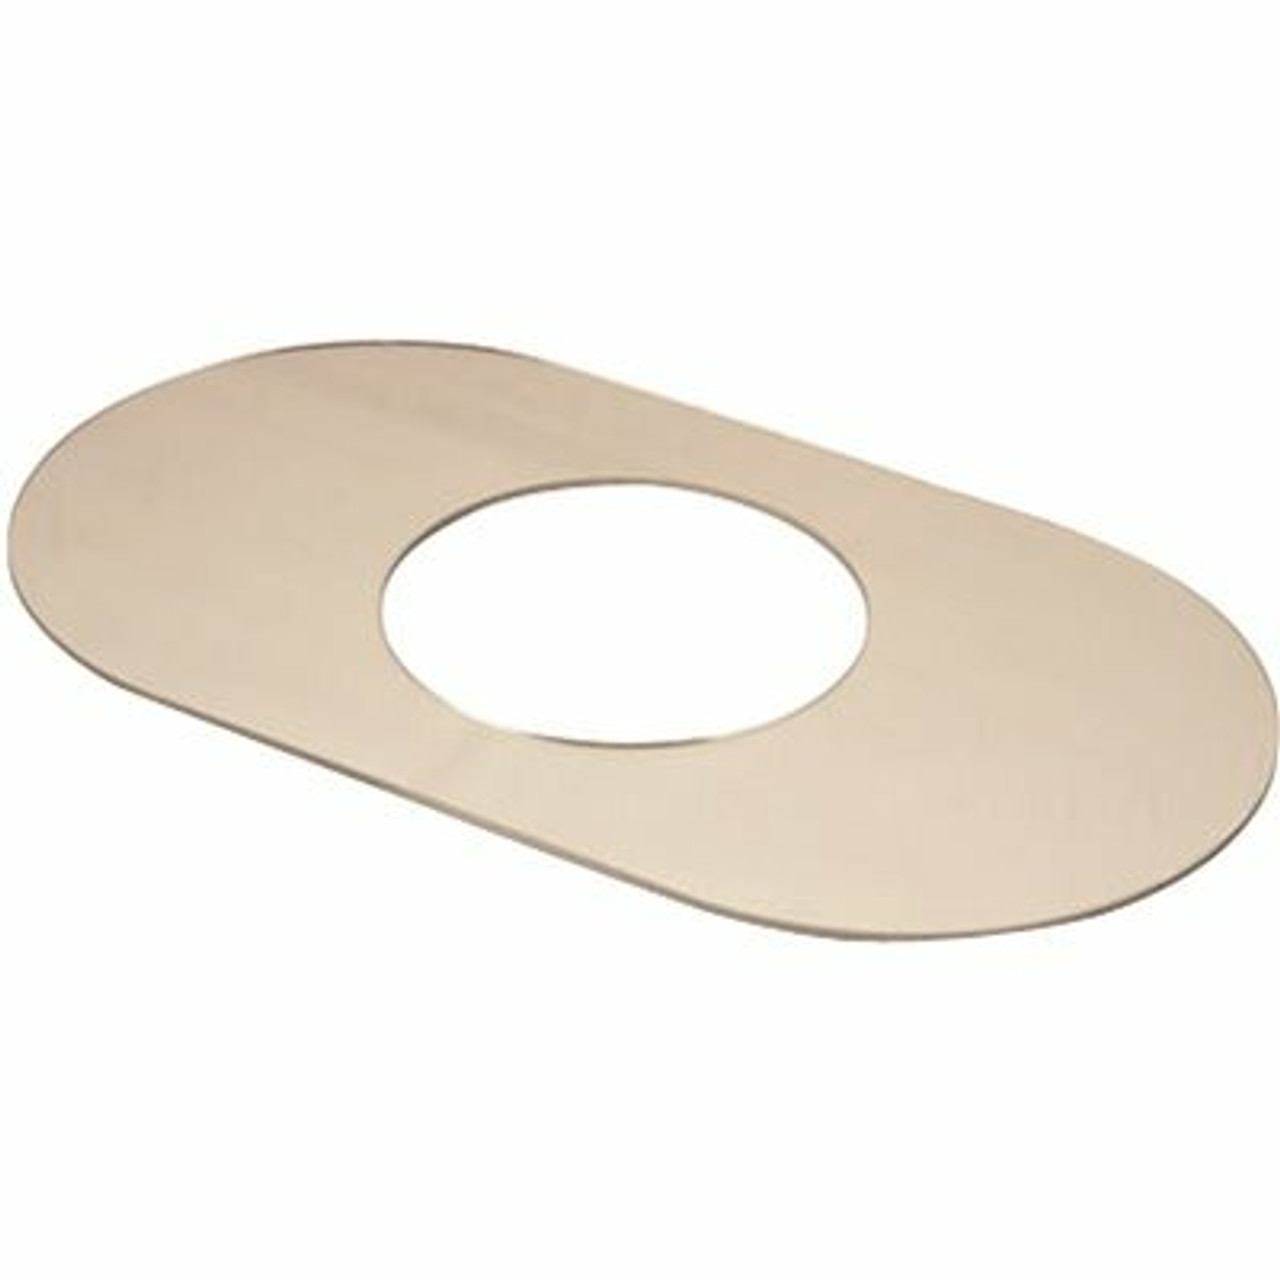 Proplus 14 In. X 6 In. Acrylic Escutcheon Shower Cover Plate